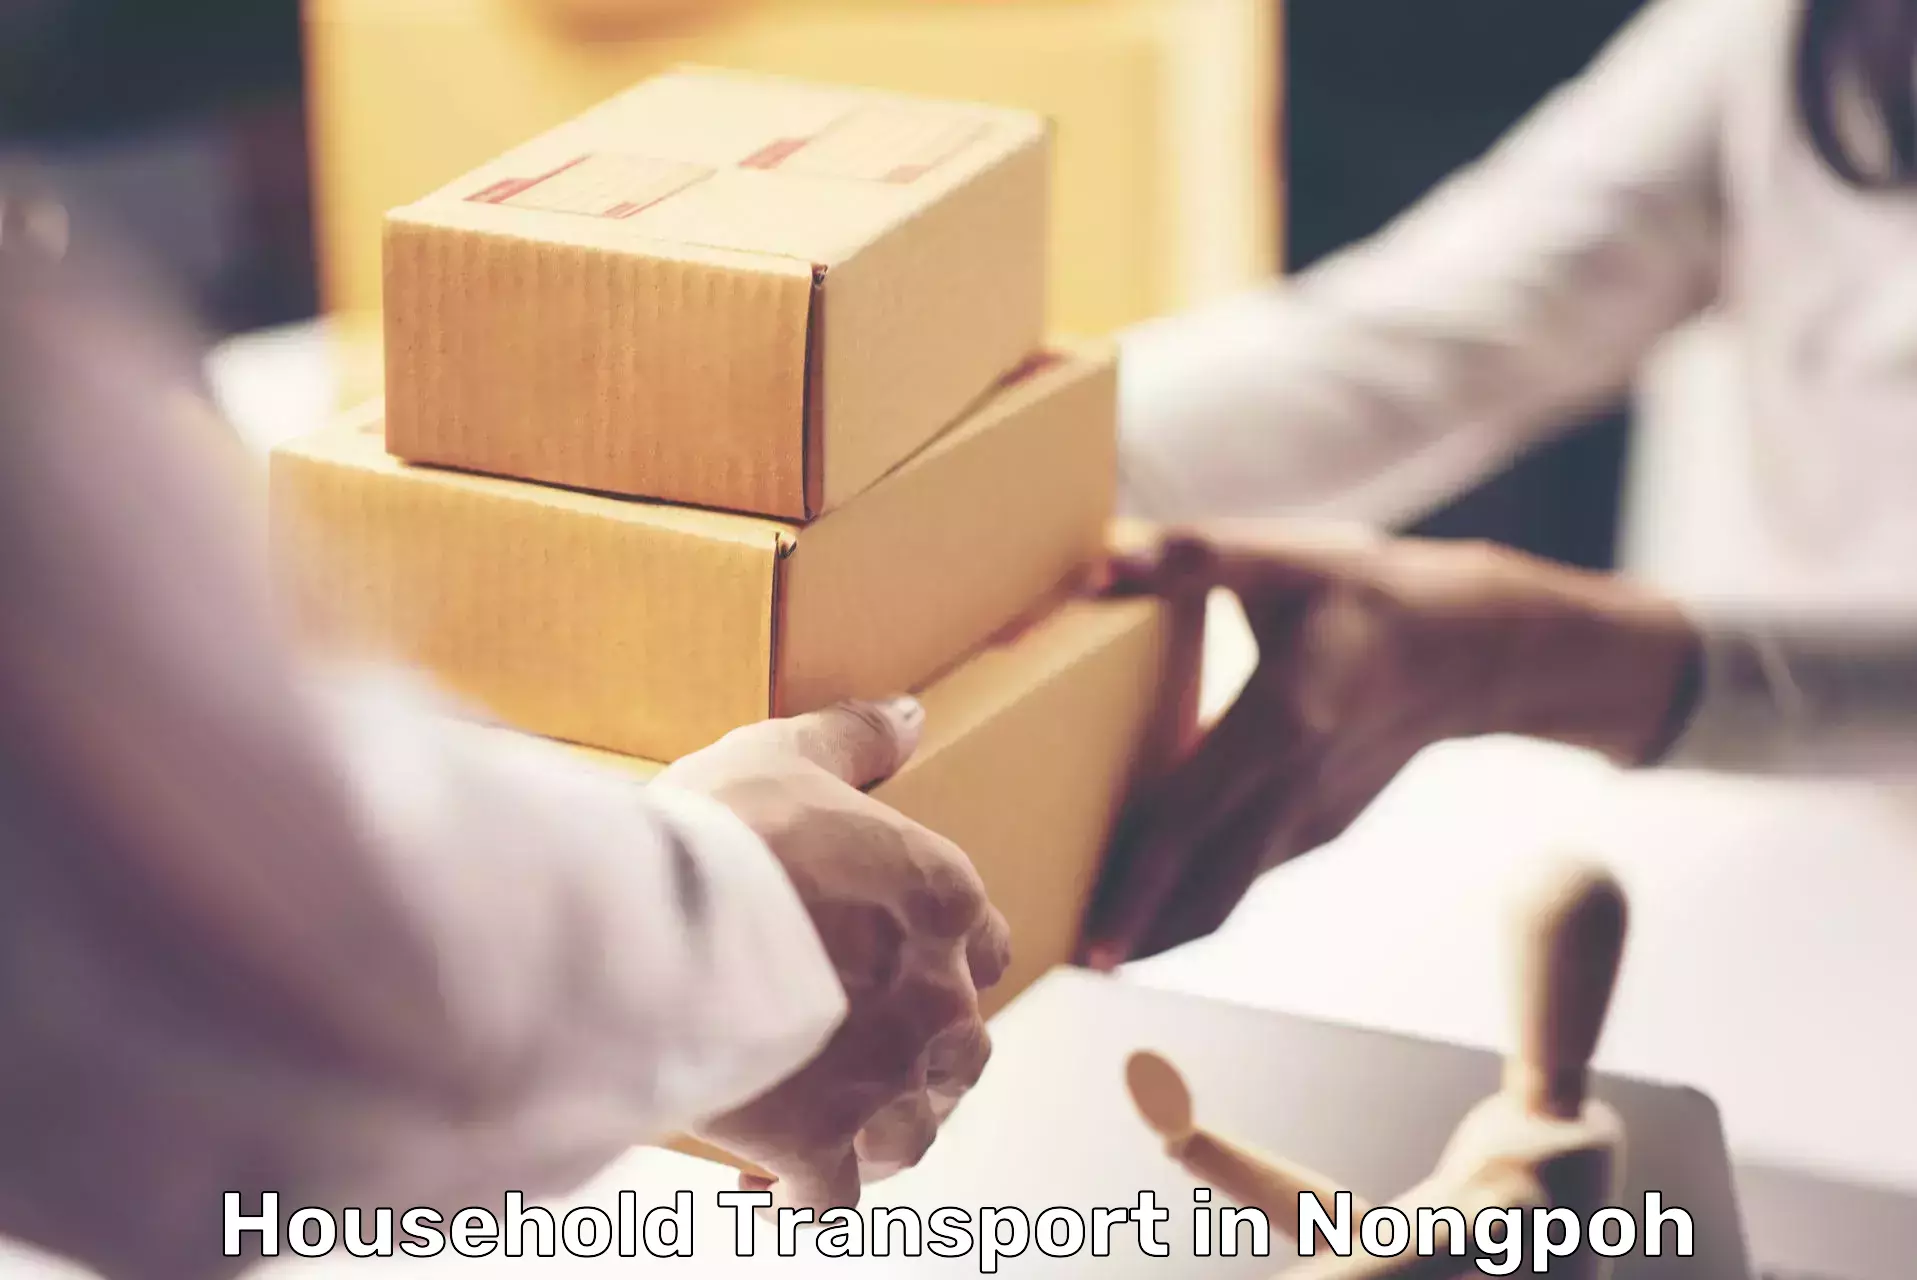 Moving and handling services in Nongpoh